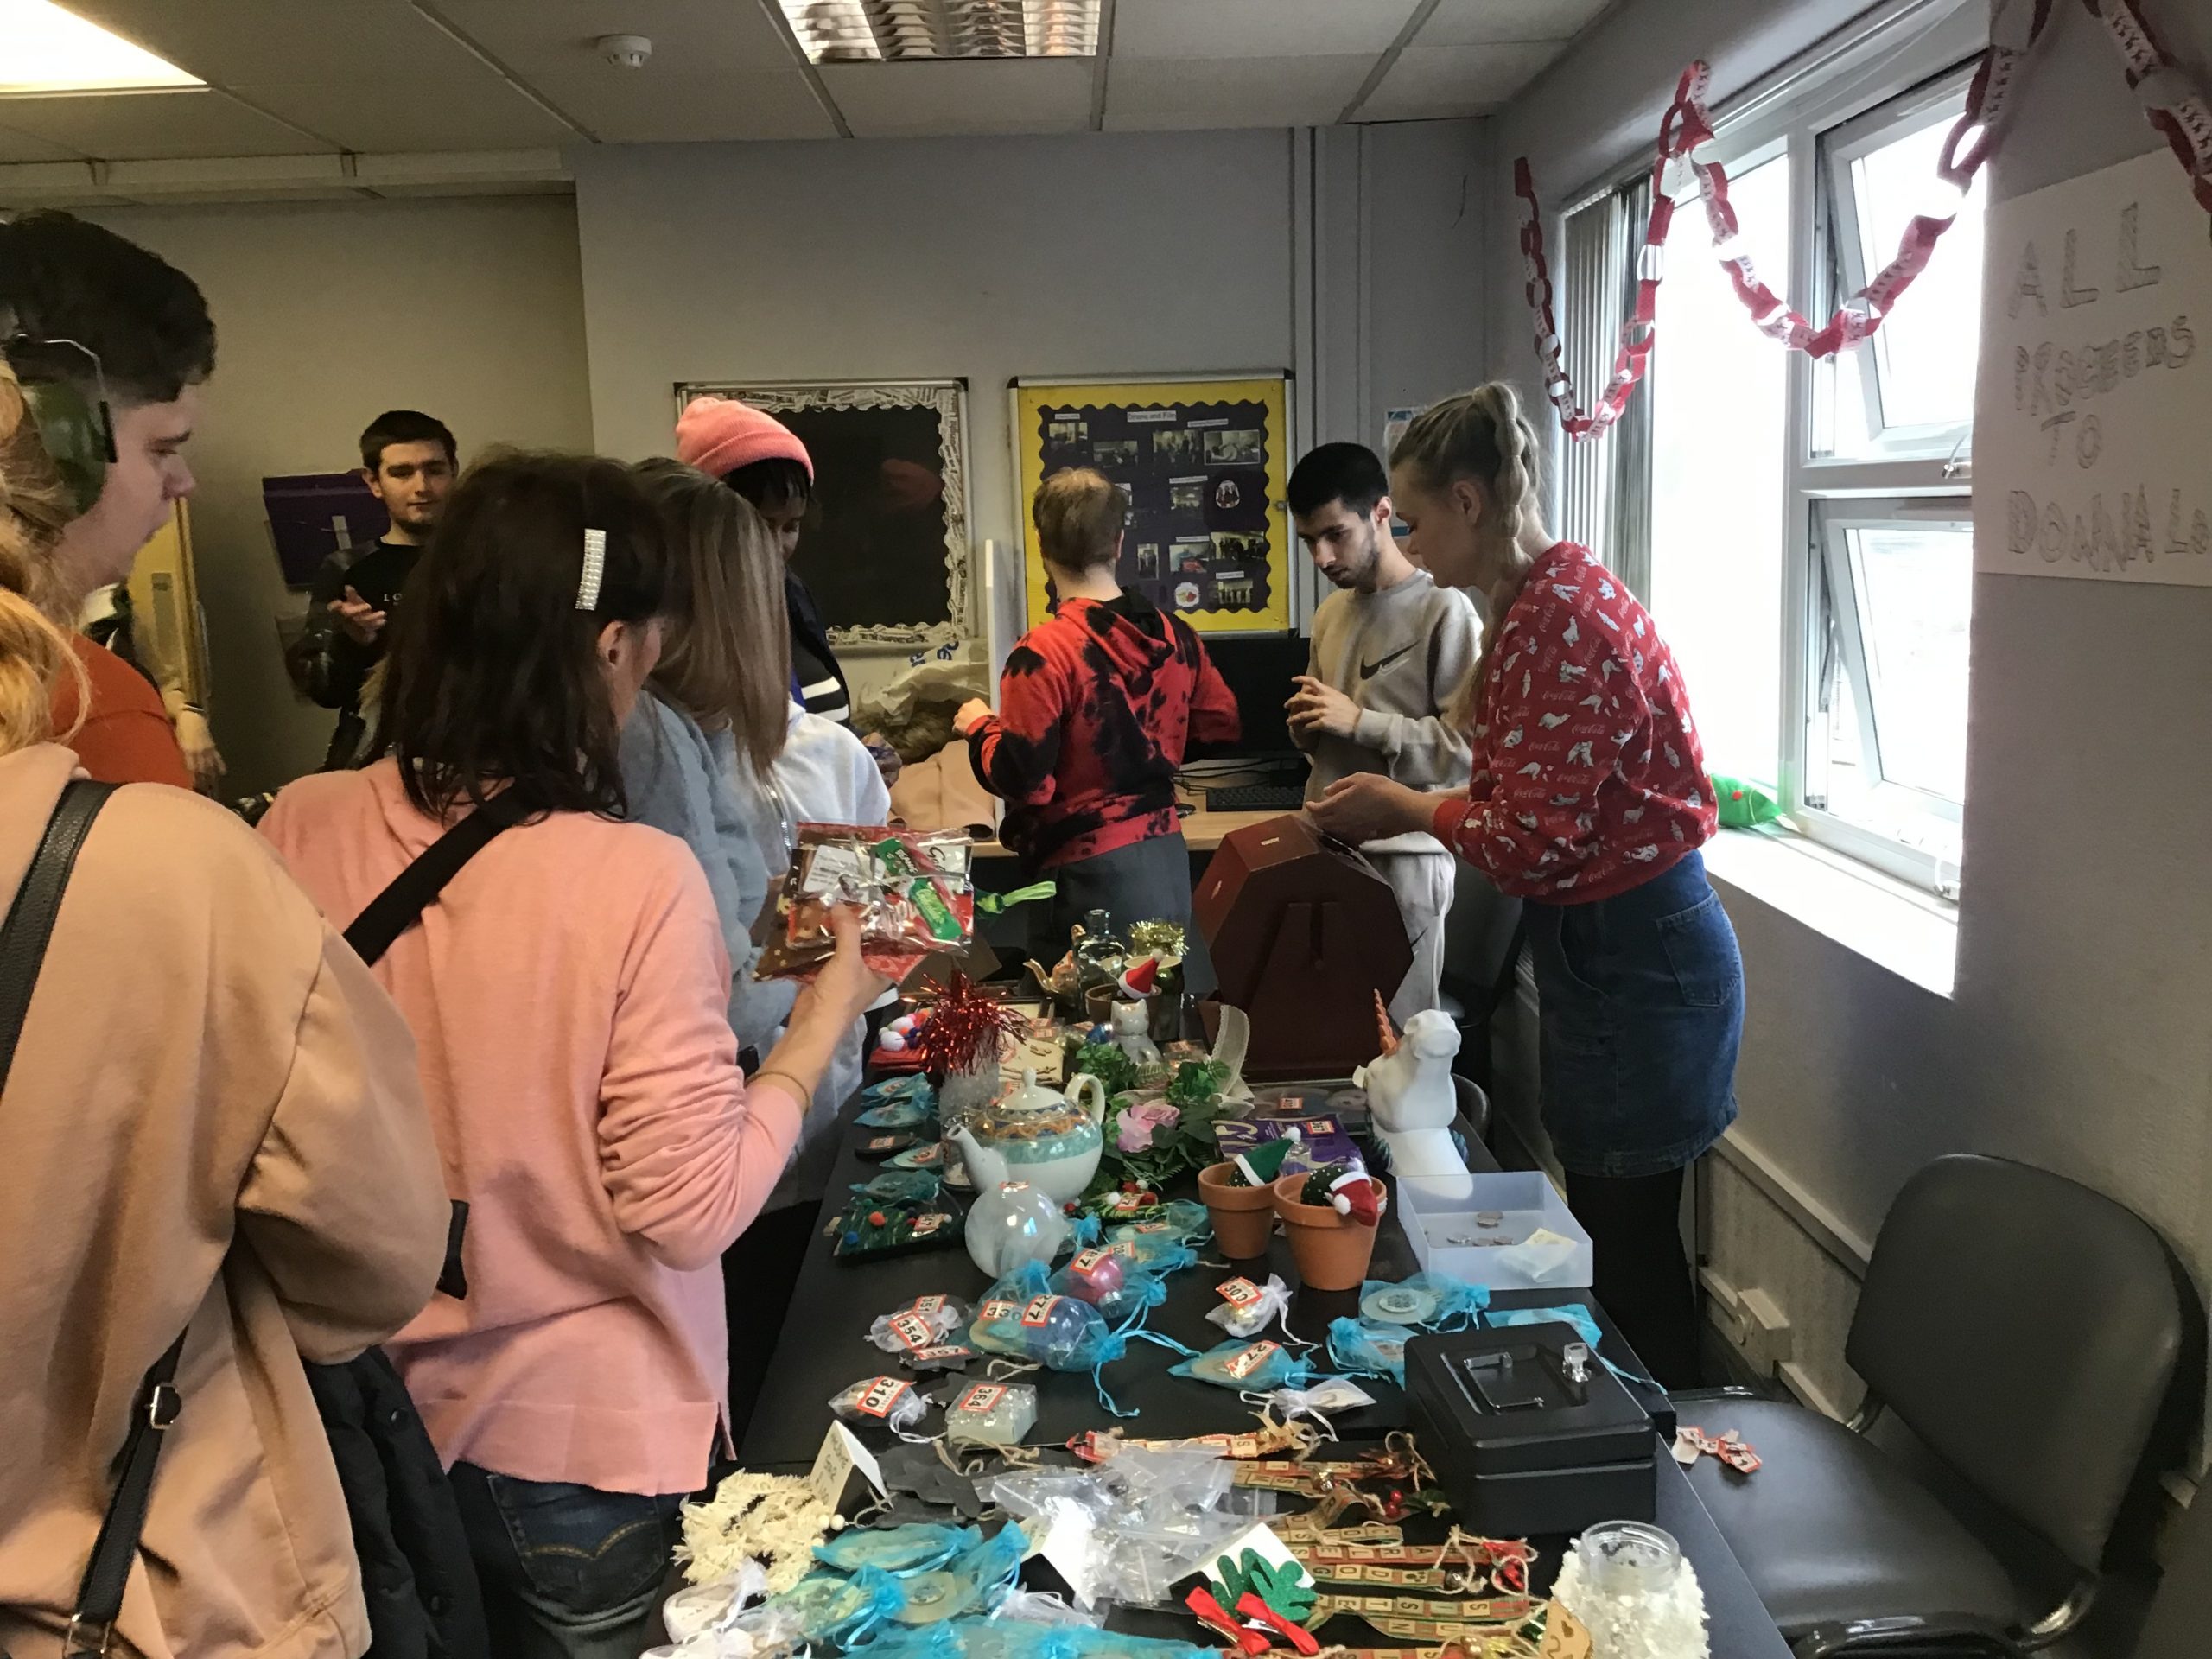 People browsing a crafts table at Regent College fair